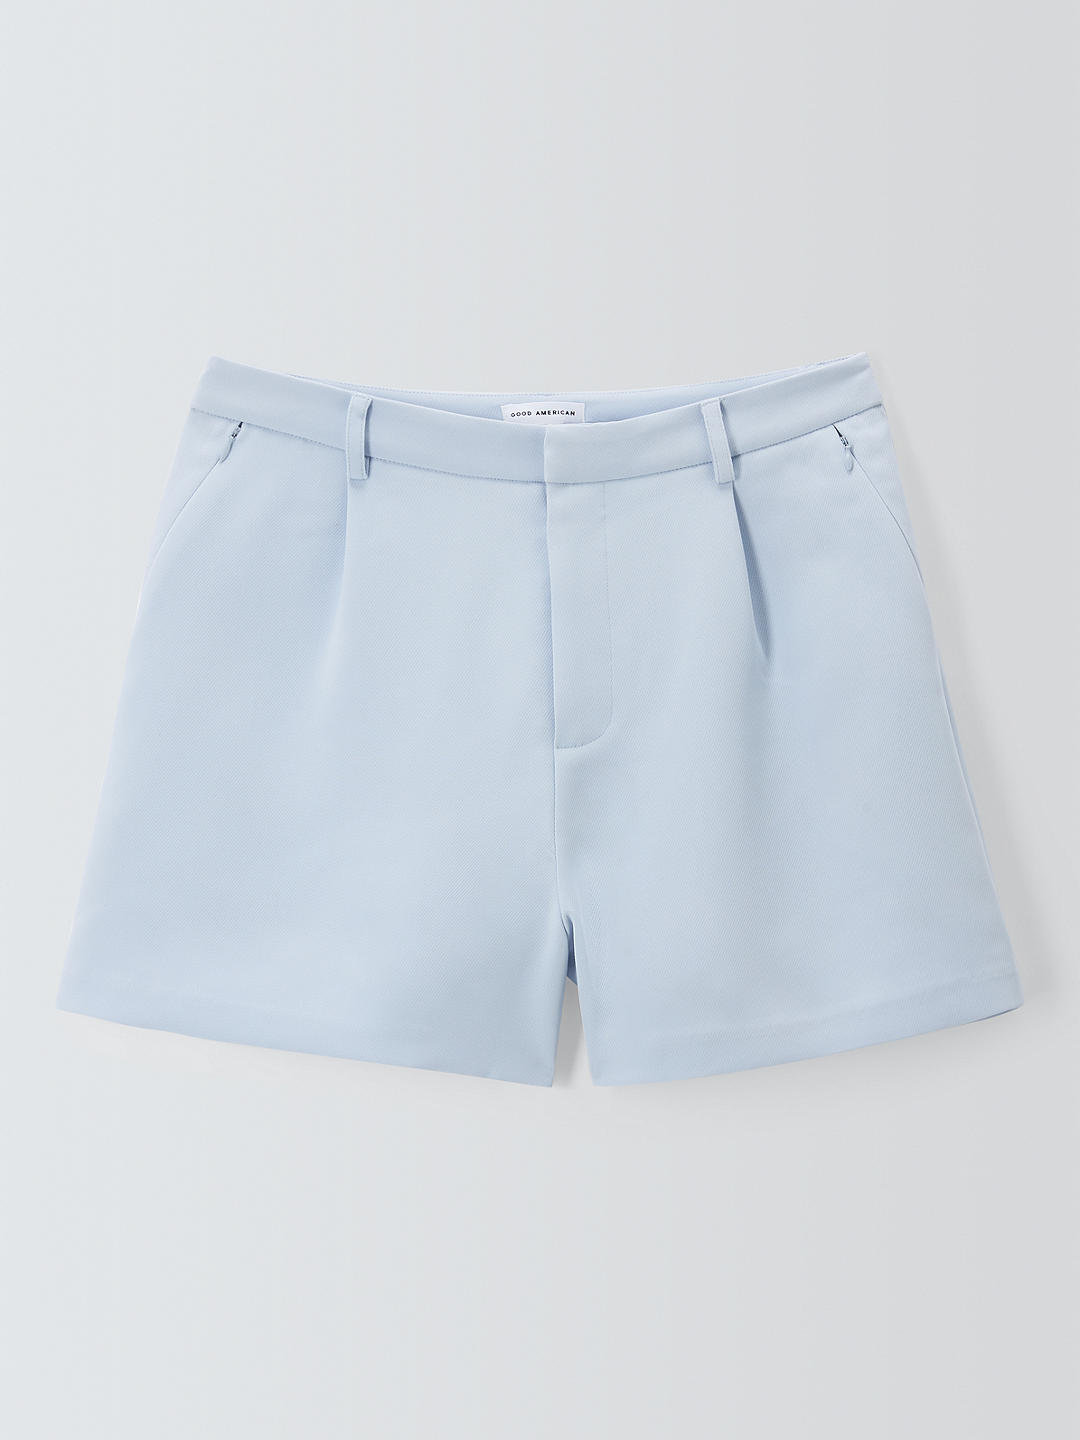 Good American Luxe Shorts, Glass